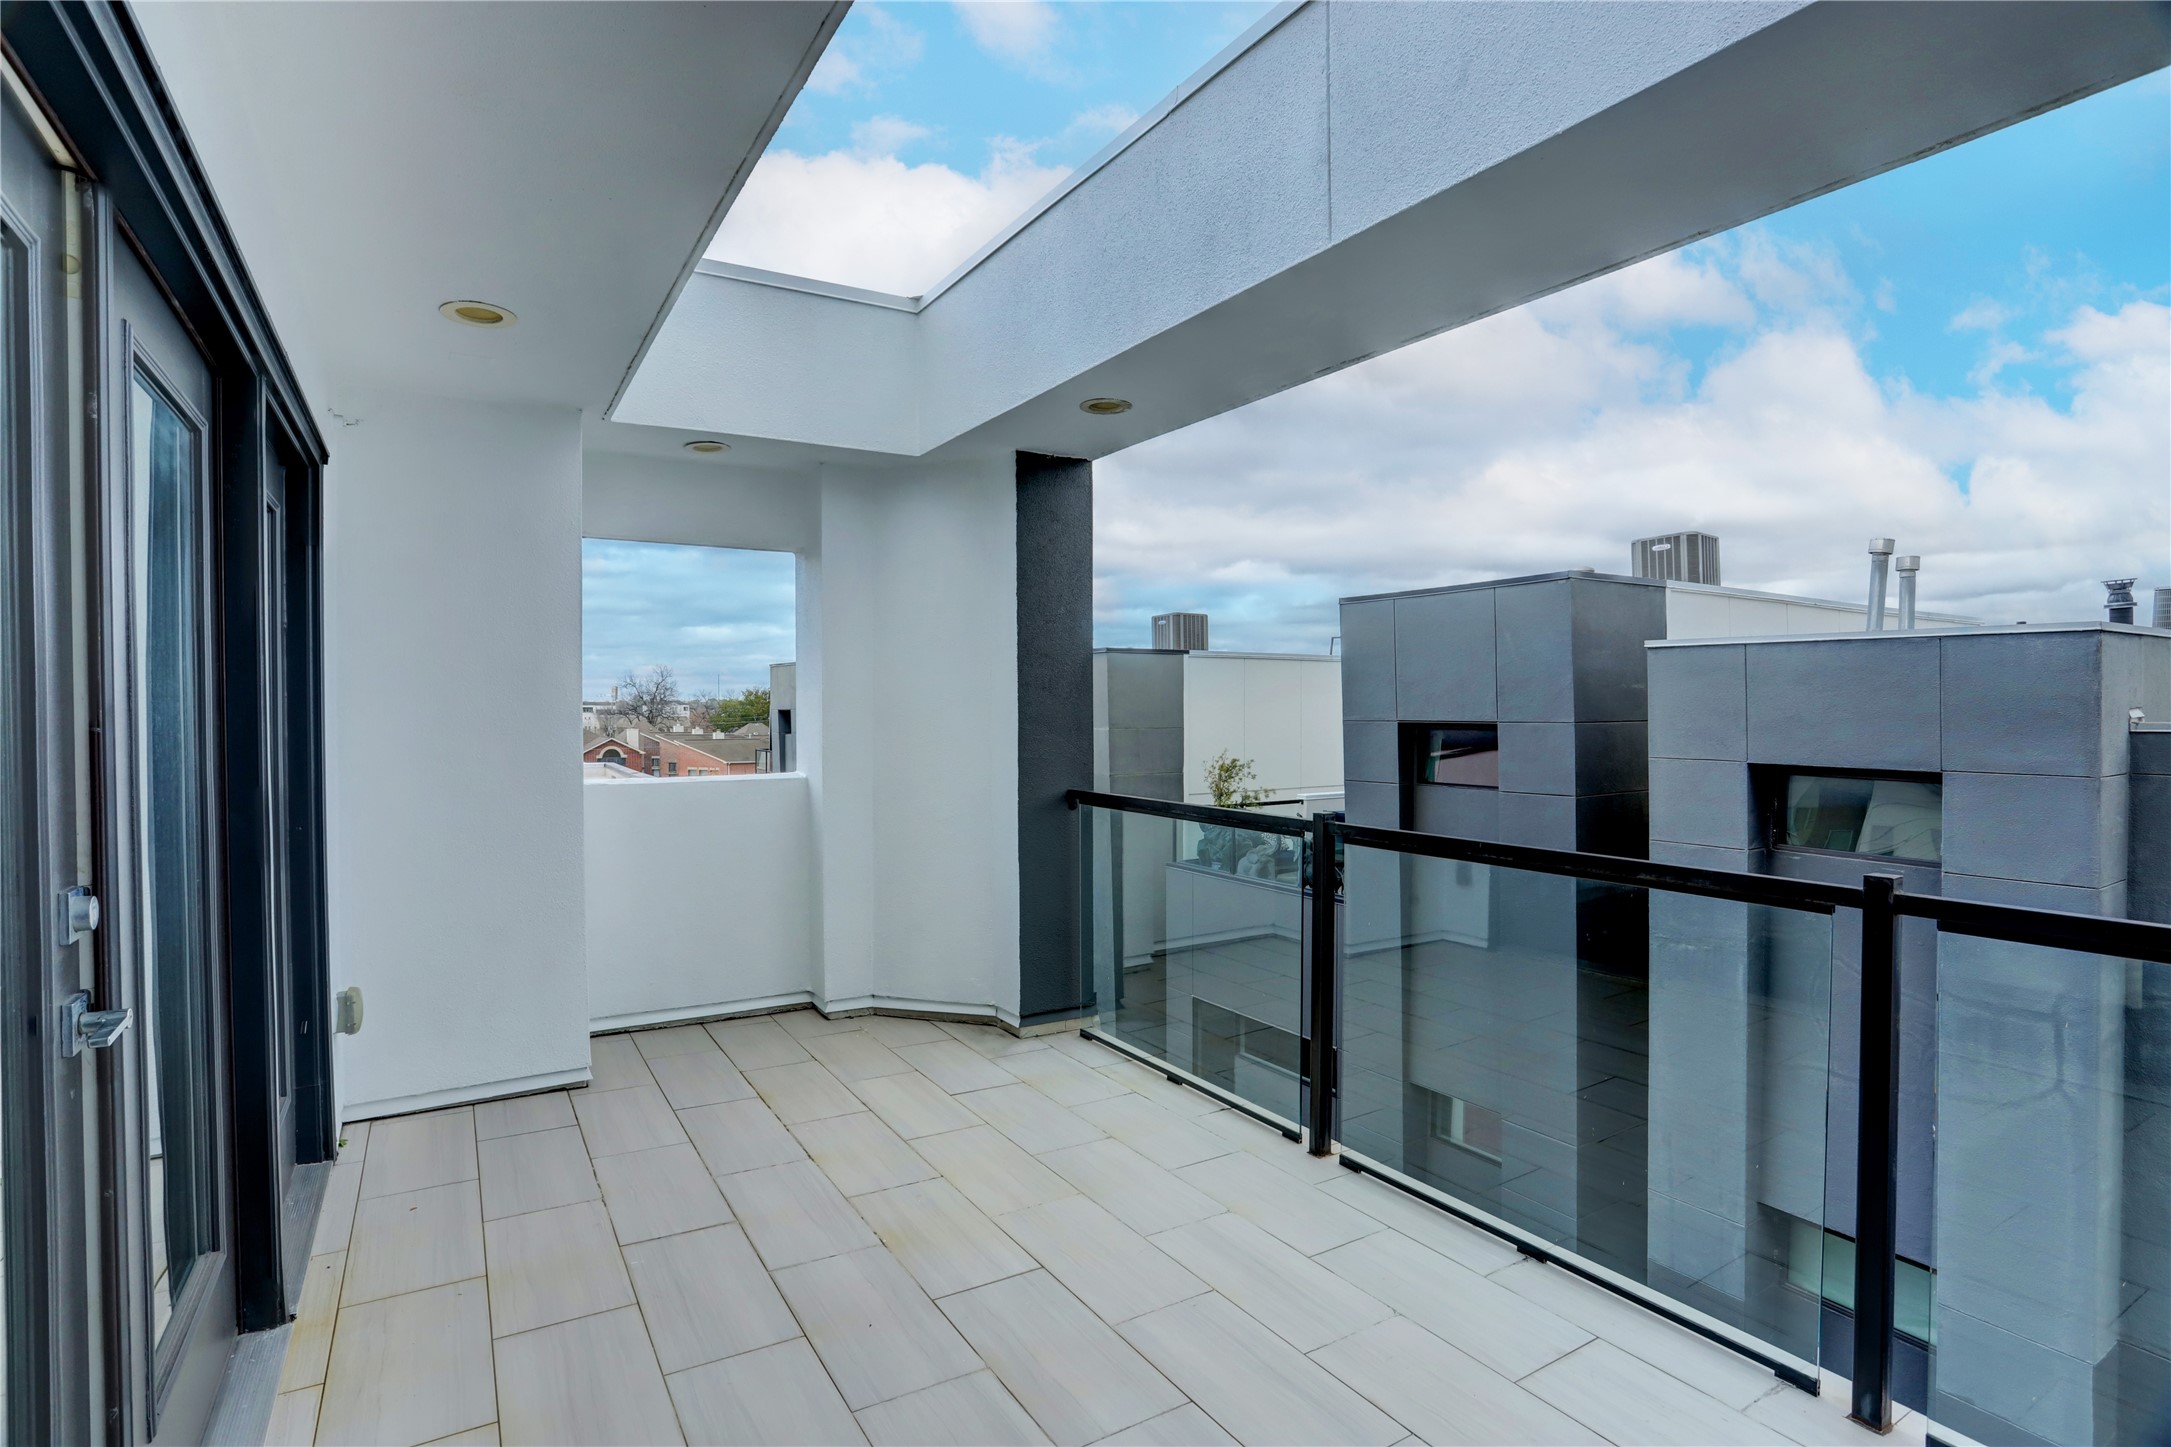 One of two the TWO rooftop terraces welcomes you to enjoy city views and fresh air is a serene setting. With a partially open ceiling you can sit outside and see the stars.